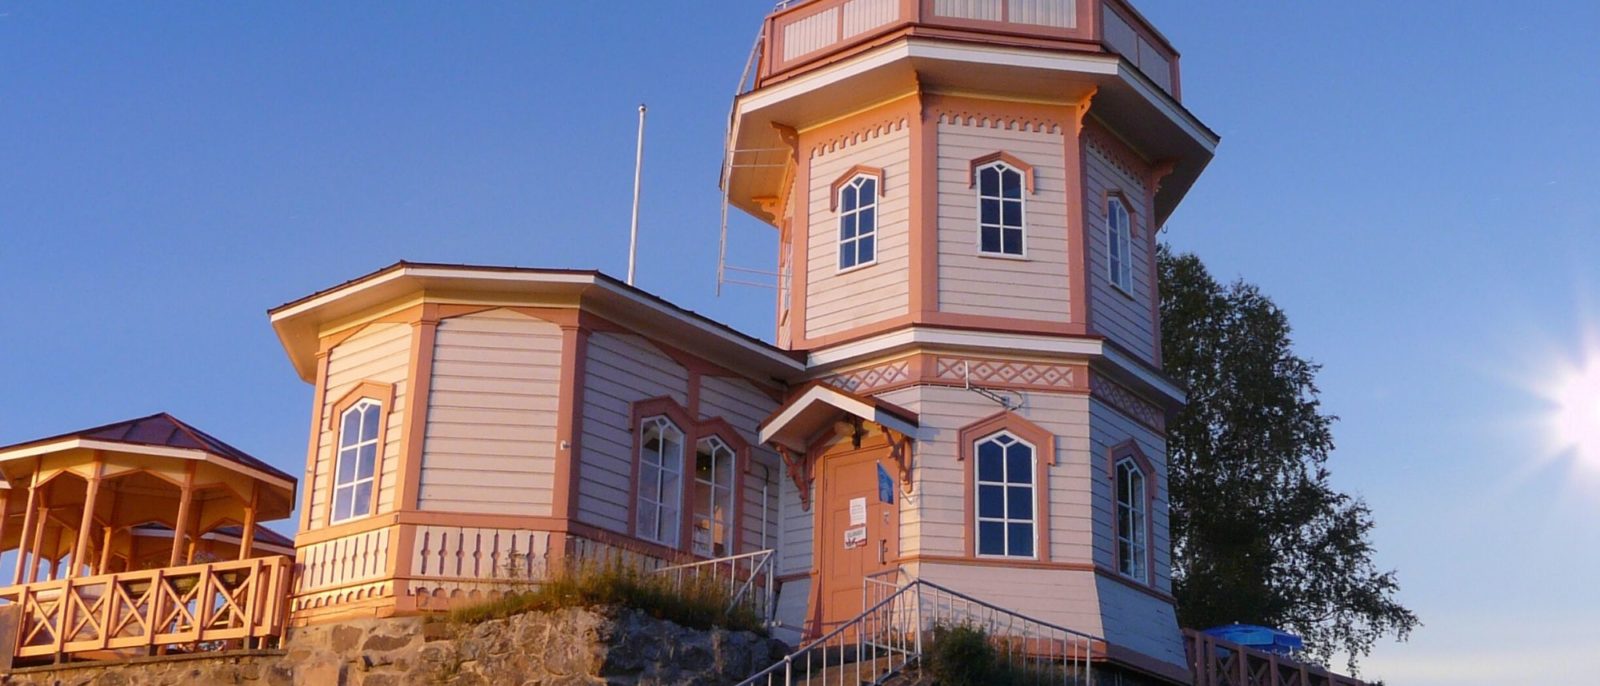 The old observatory tower